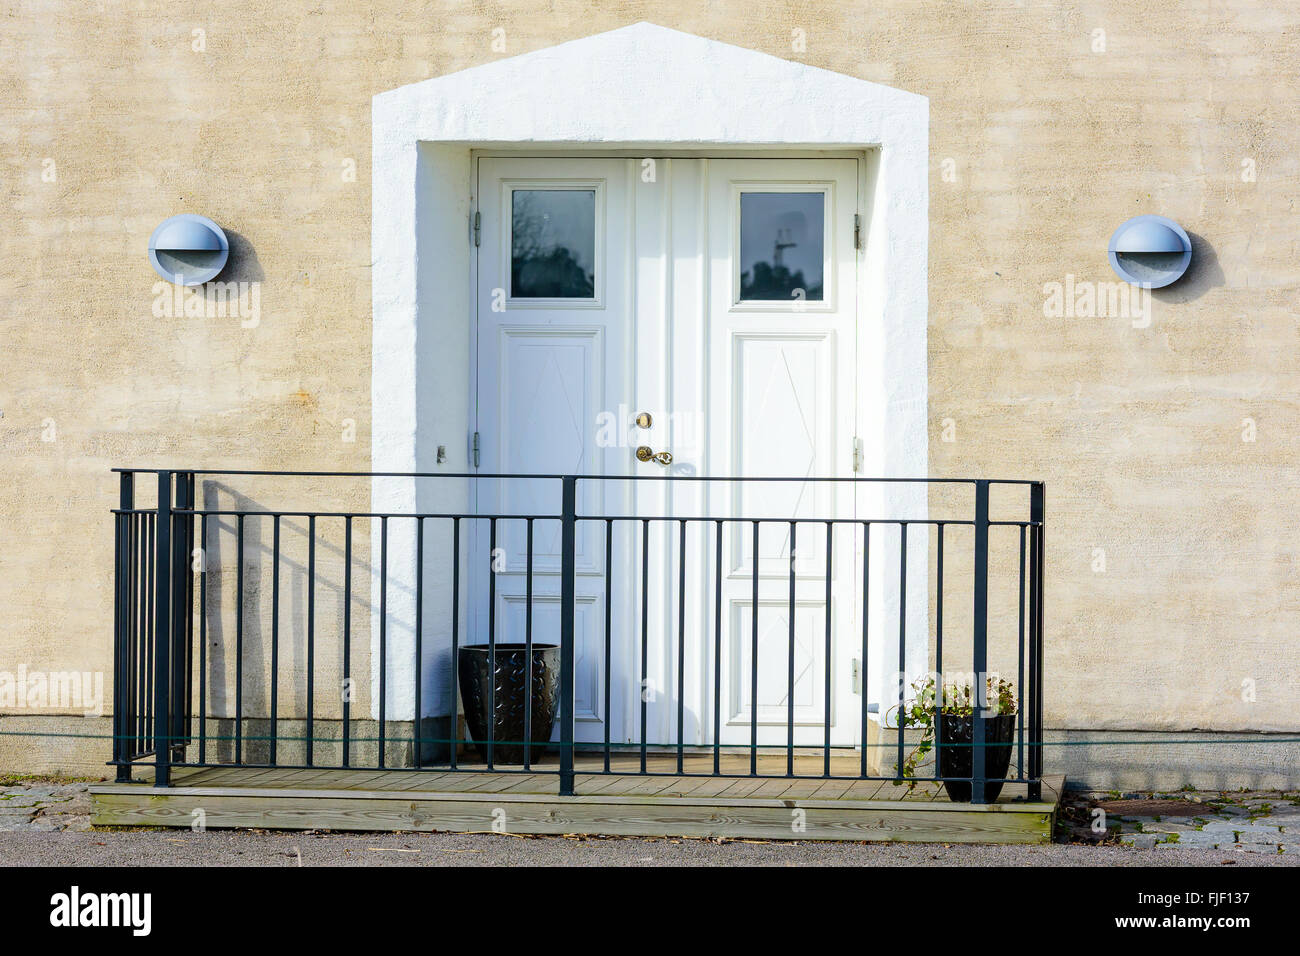 A white door and doorway on a building. Lamps on either side and a metal fence in front. Stock Photo